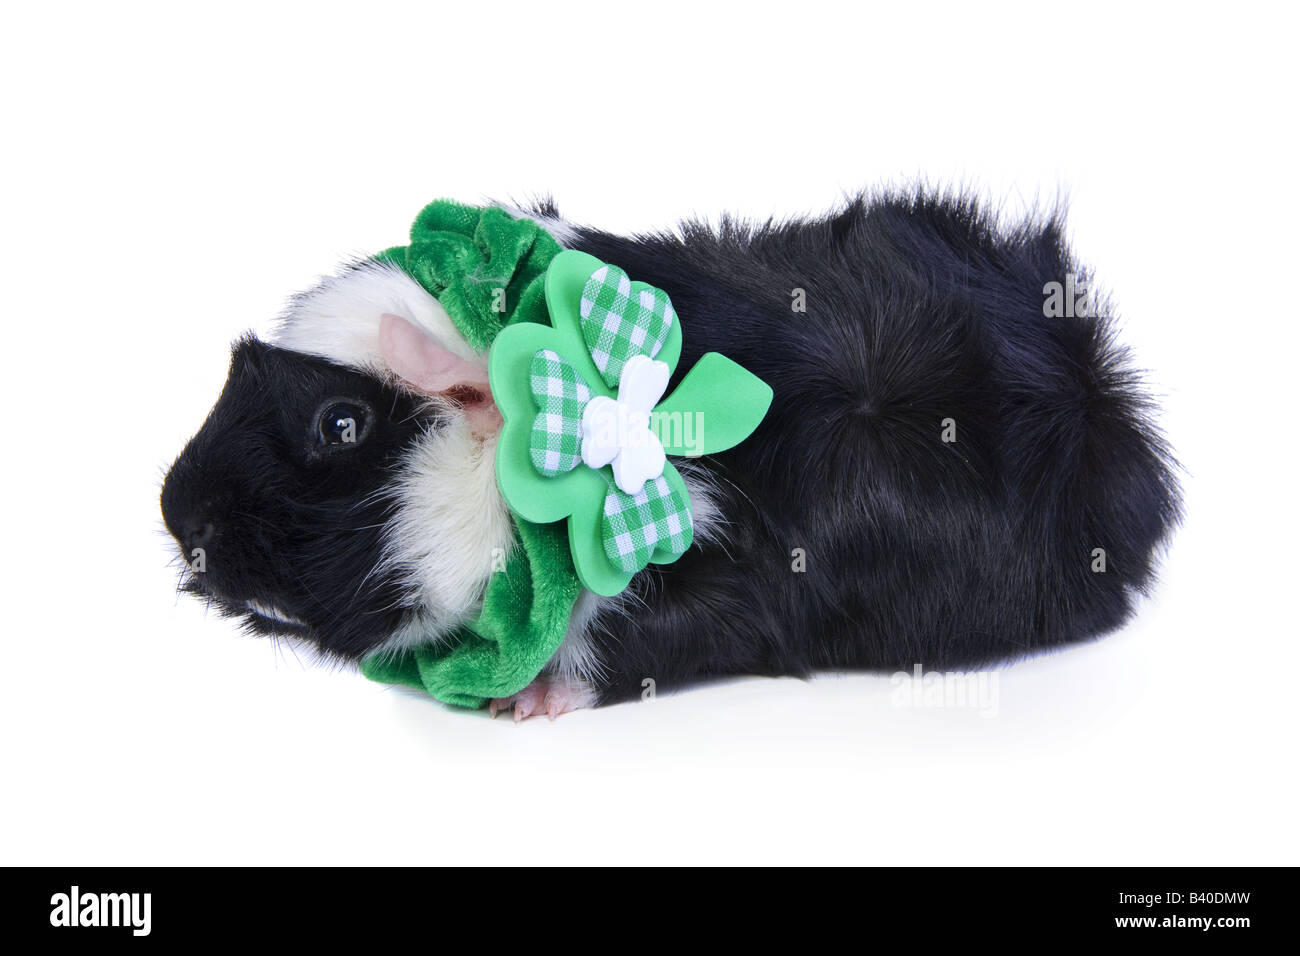 Cute Black and white St Patricks Day Guinea pig or Cavy isolated on white background Stock Photo